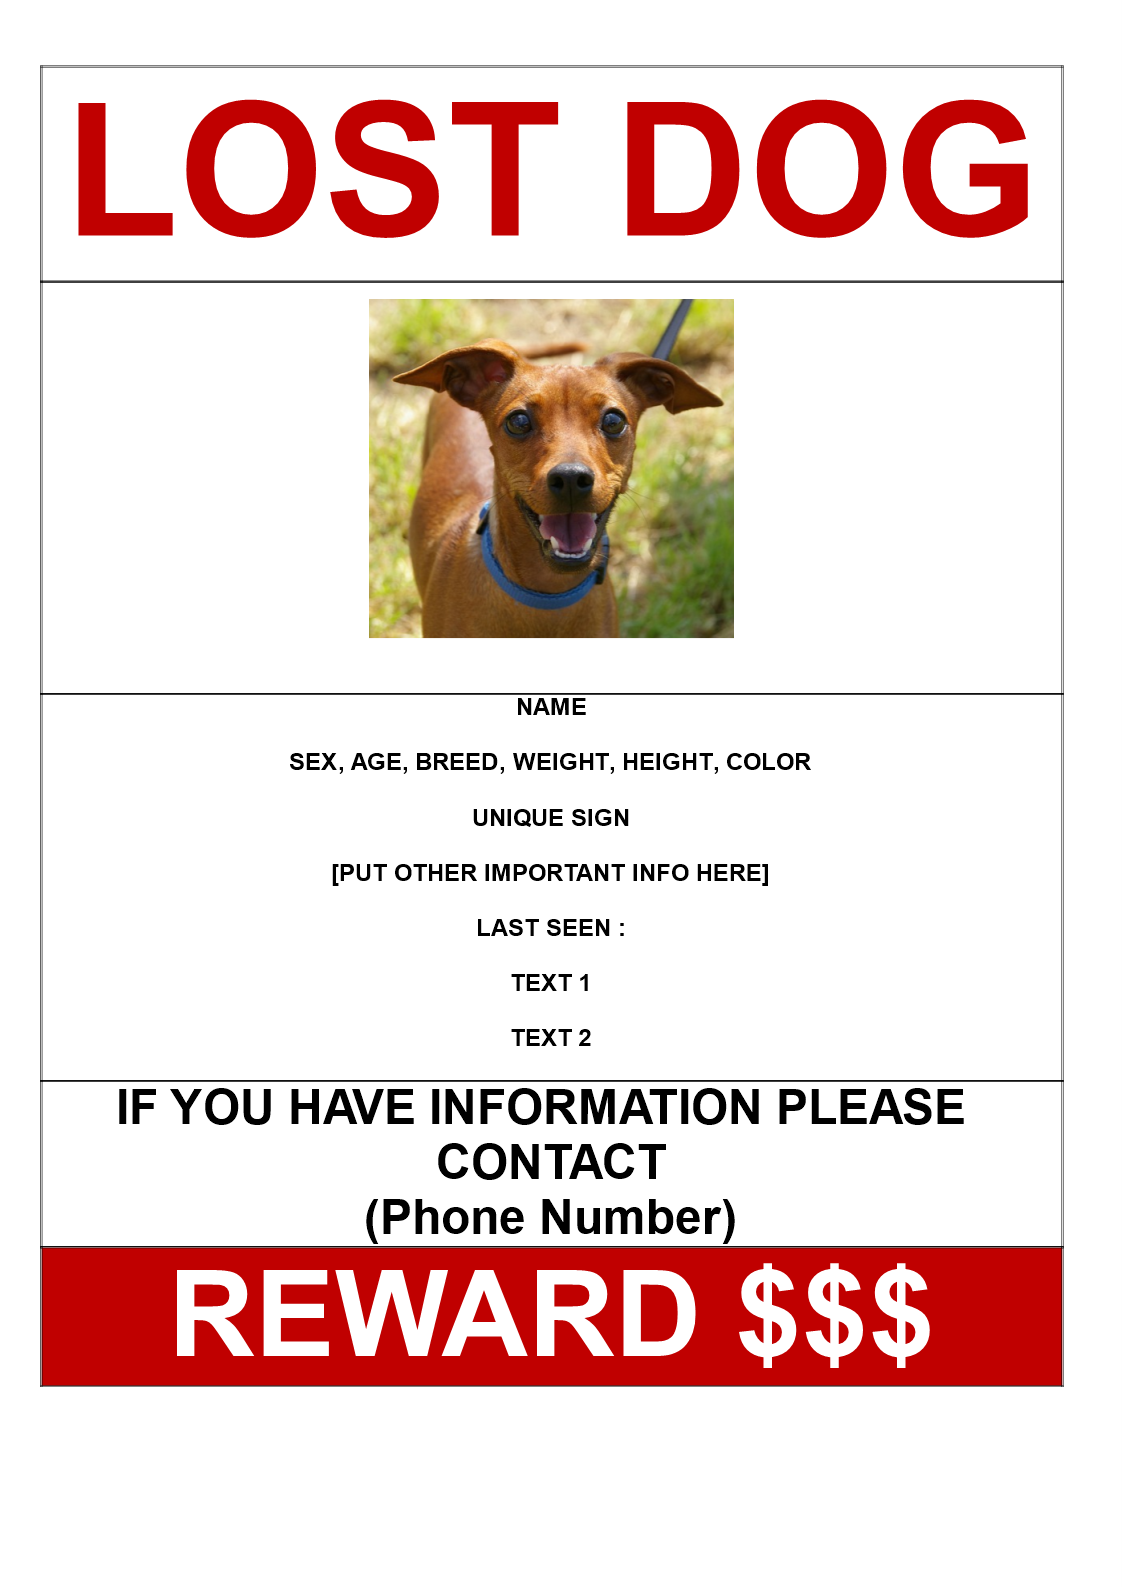 missing dog poster with reward a3 size template